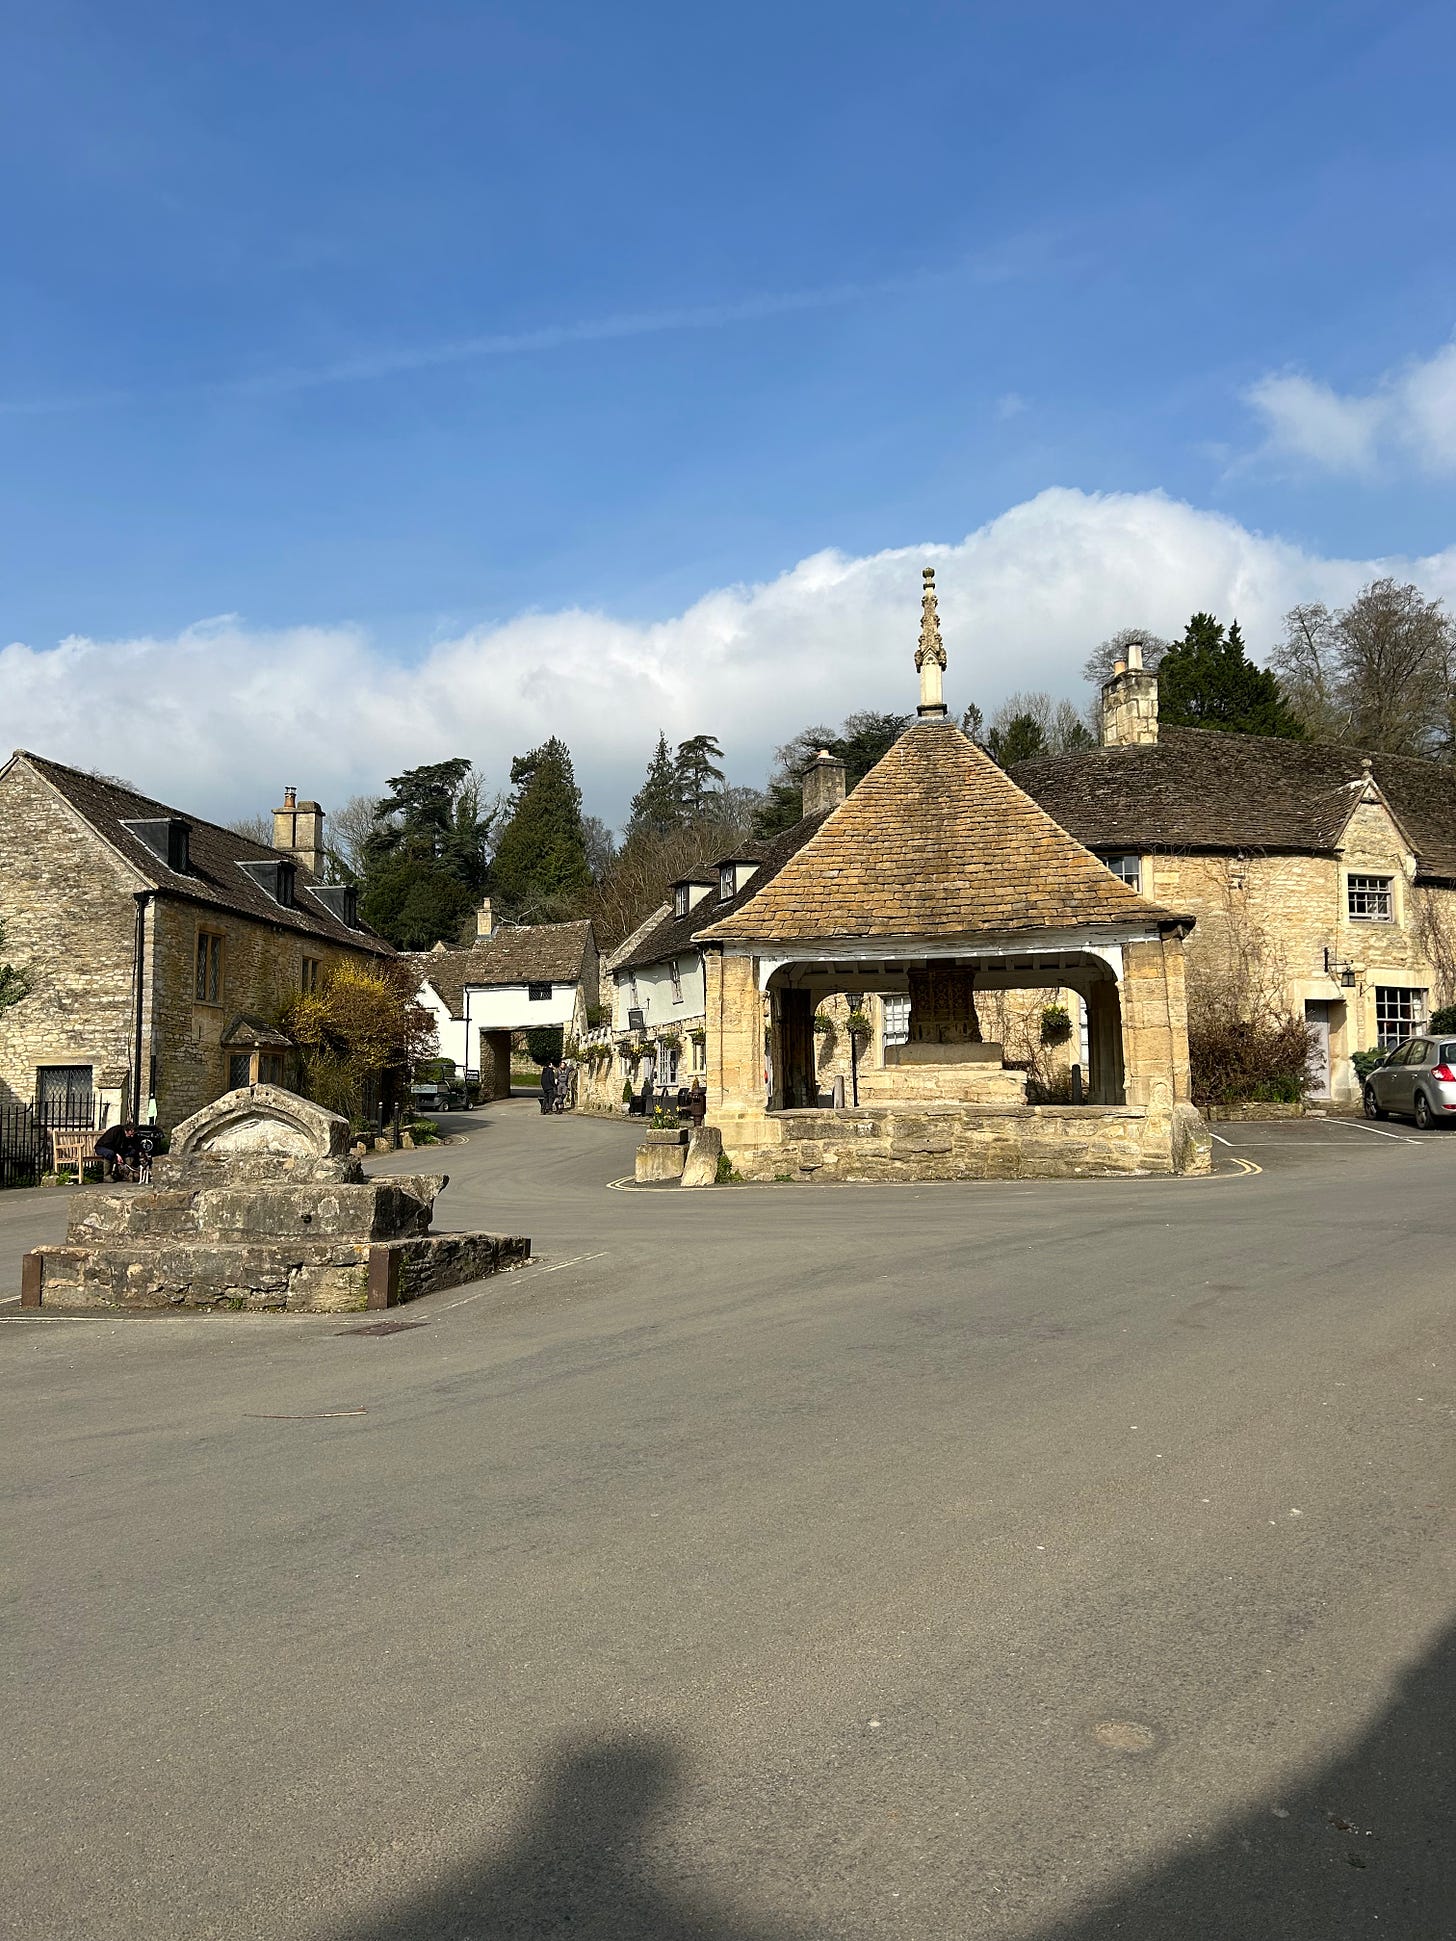 The Market Cross with its roof and in front of it is the Castle Combe Buttercross where butter would have once been sold at the market. Image: Roland’s Travels